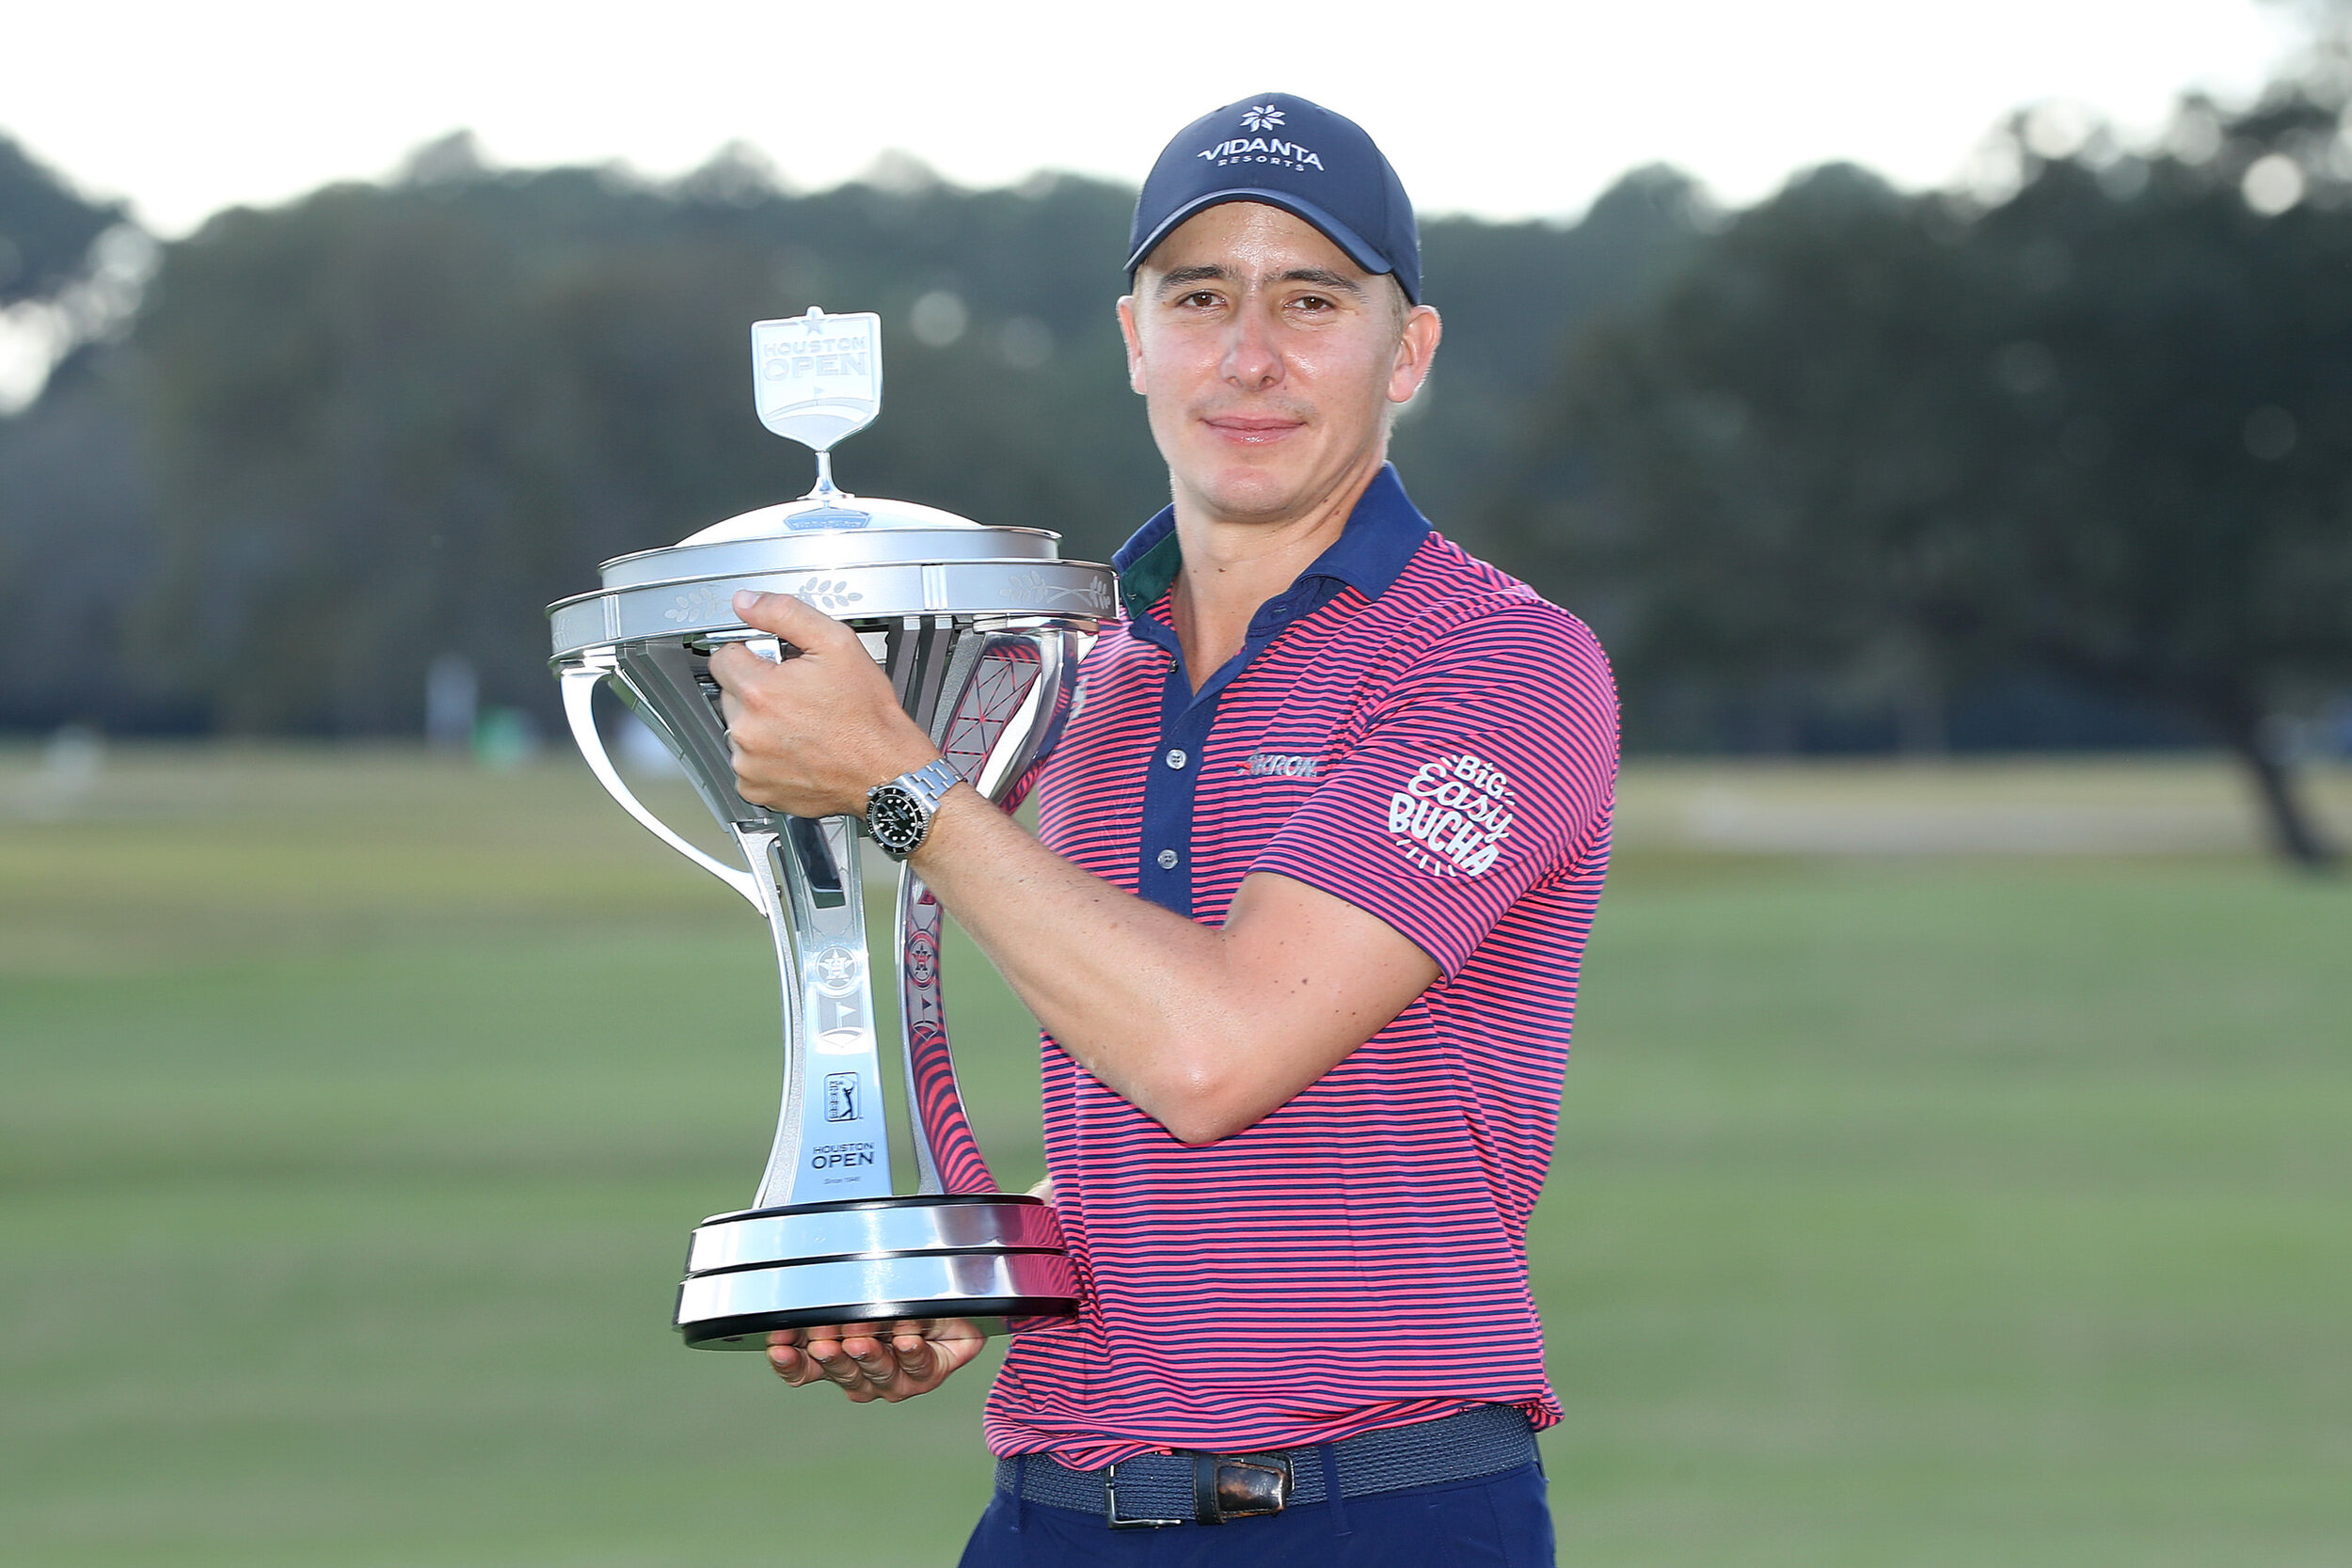  HOUSTON, TEXAS - NOVEMBER 08: Carlos Ortiz of Mexico poses with the trophy after winning the Houston Open at Memorial Park Golf Course on November 08, 2020 in Houston, Texas. (Photo by Maddie Meyer/Getty Images) 